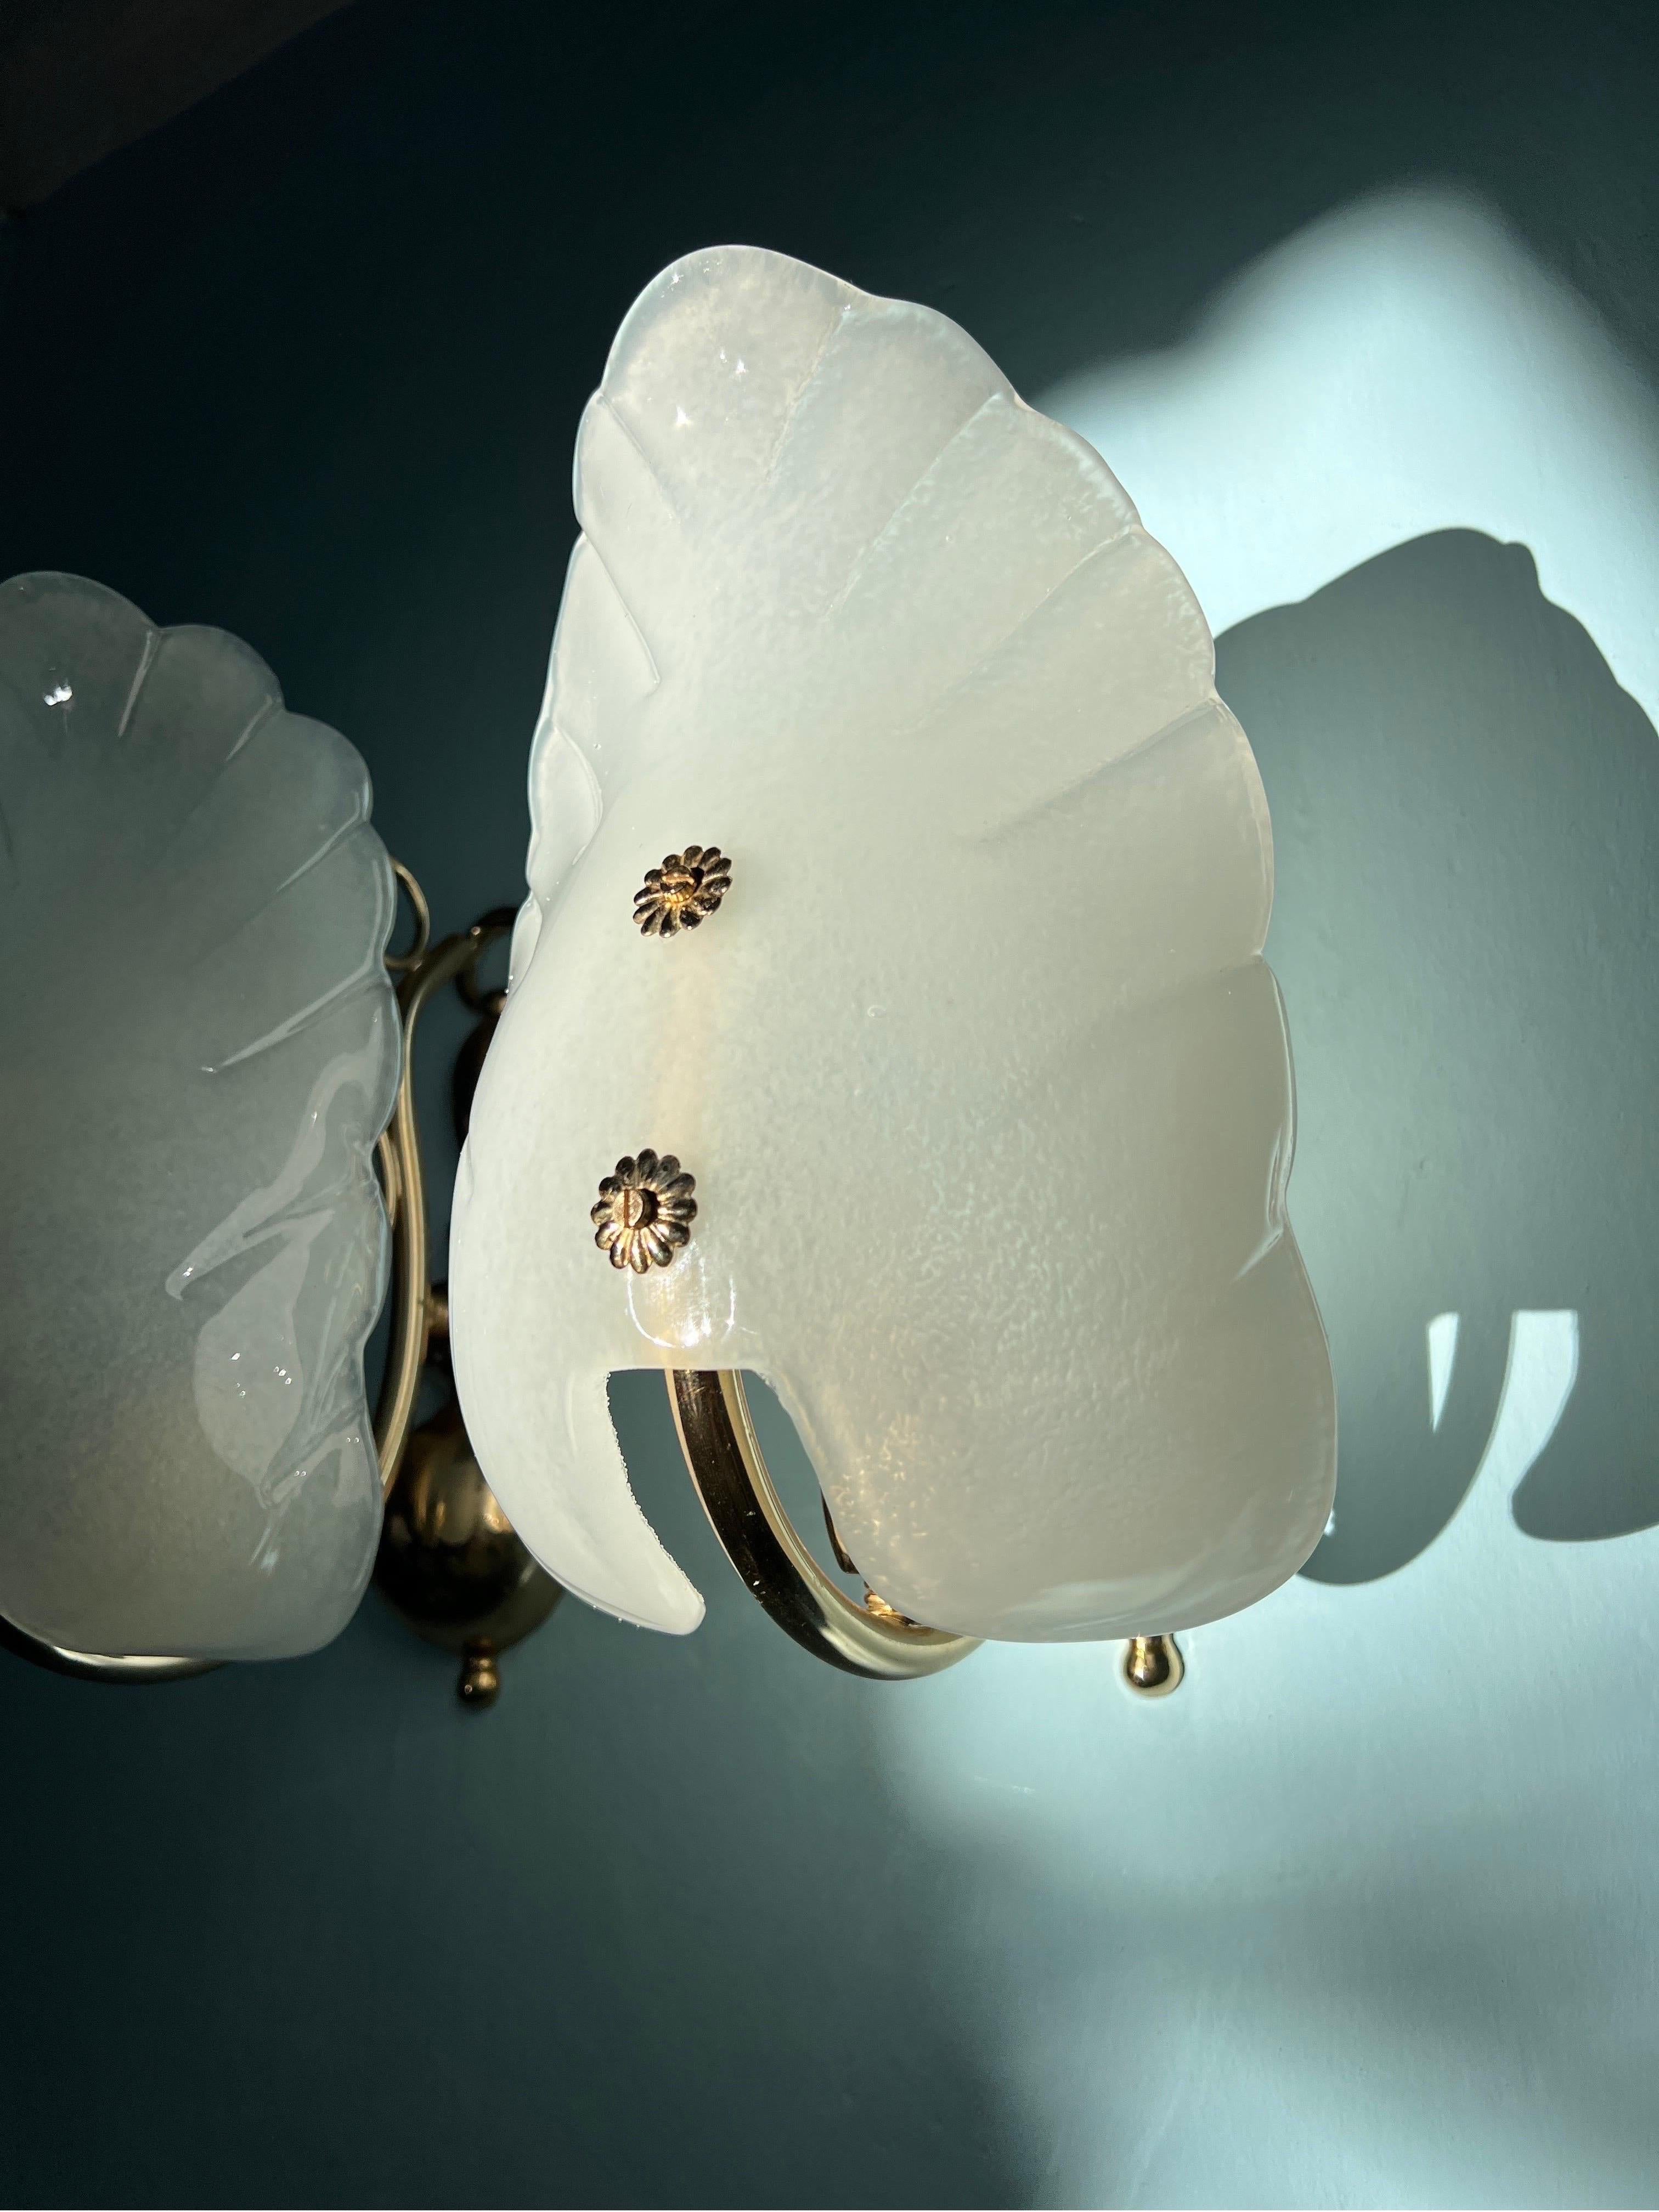 This pair of Murano glass wall lights is truly amazing. Crafted with precision, the Murano glasses is gracefully shaped like delicate shells, adding a touch of nature's elegance to their design.
The glass is set on a sturdy metal base, these